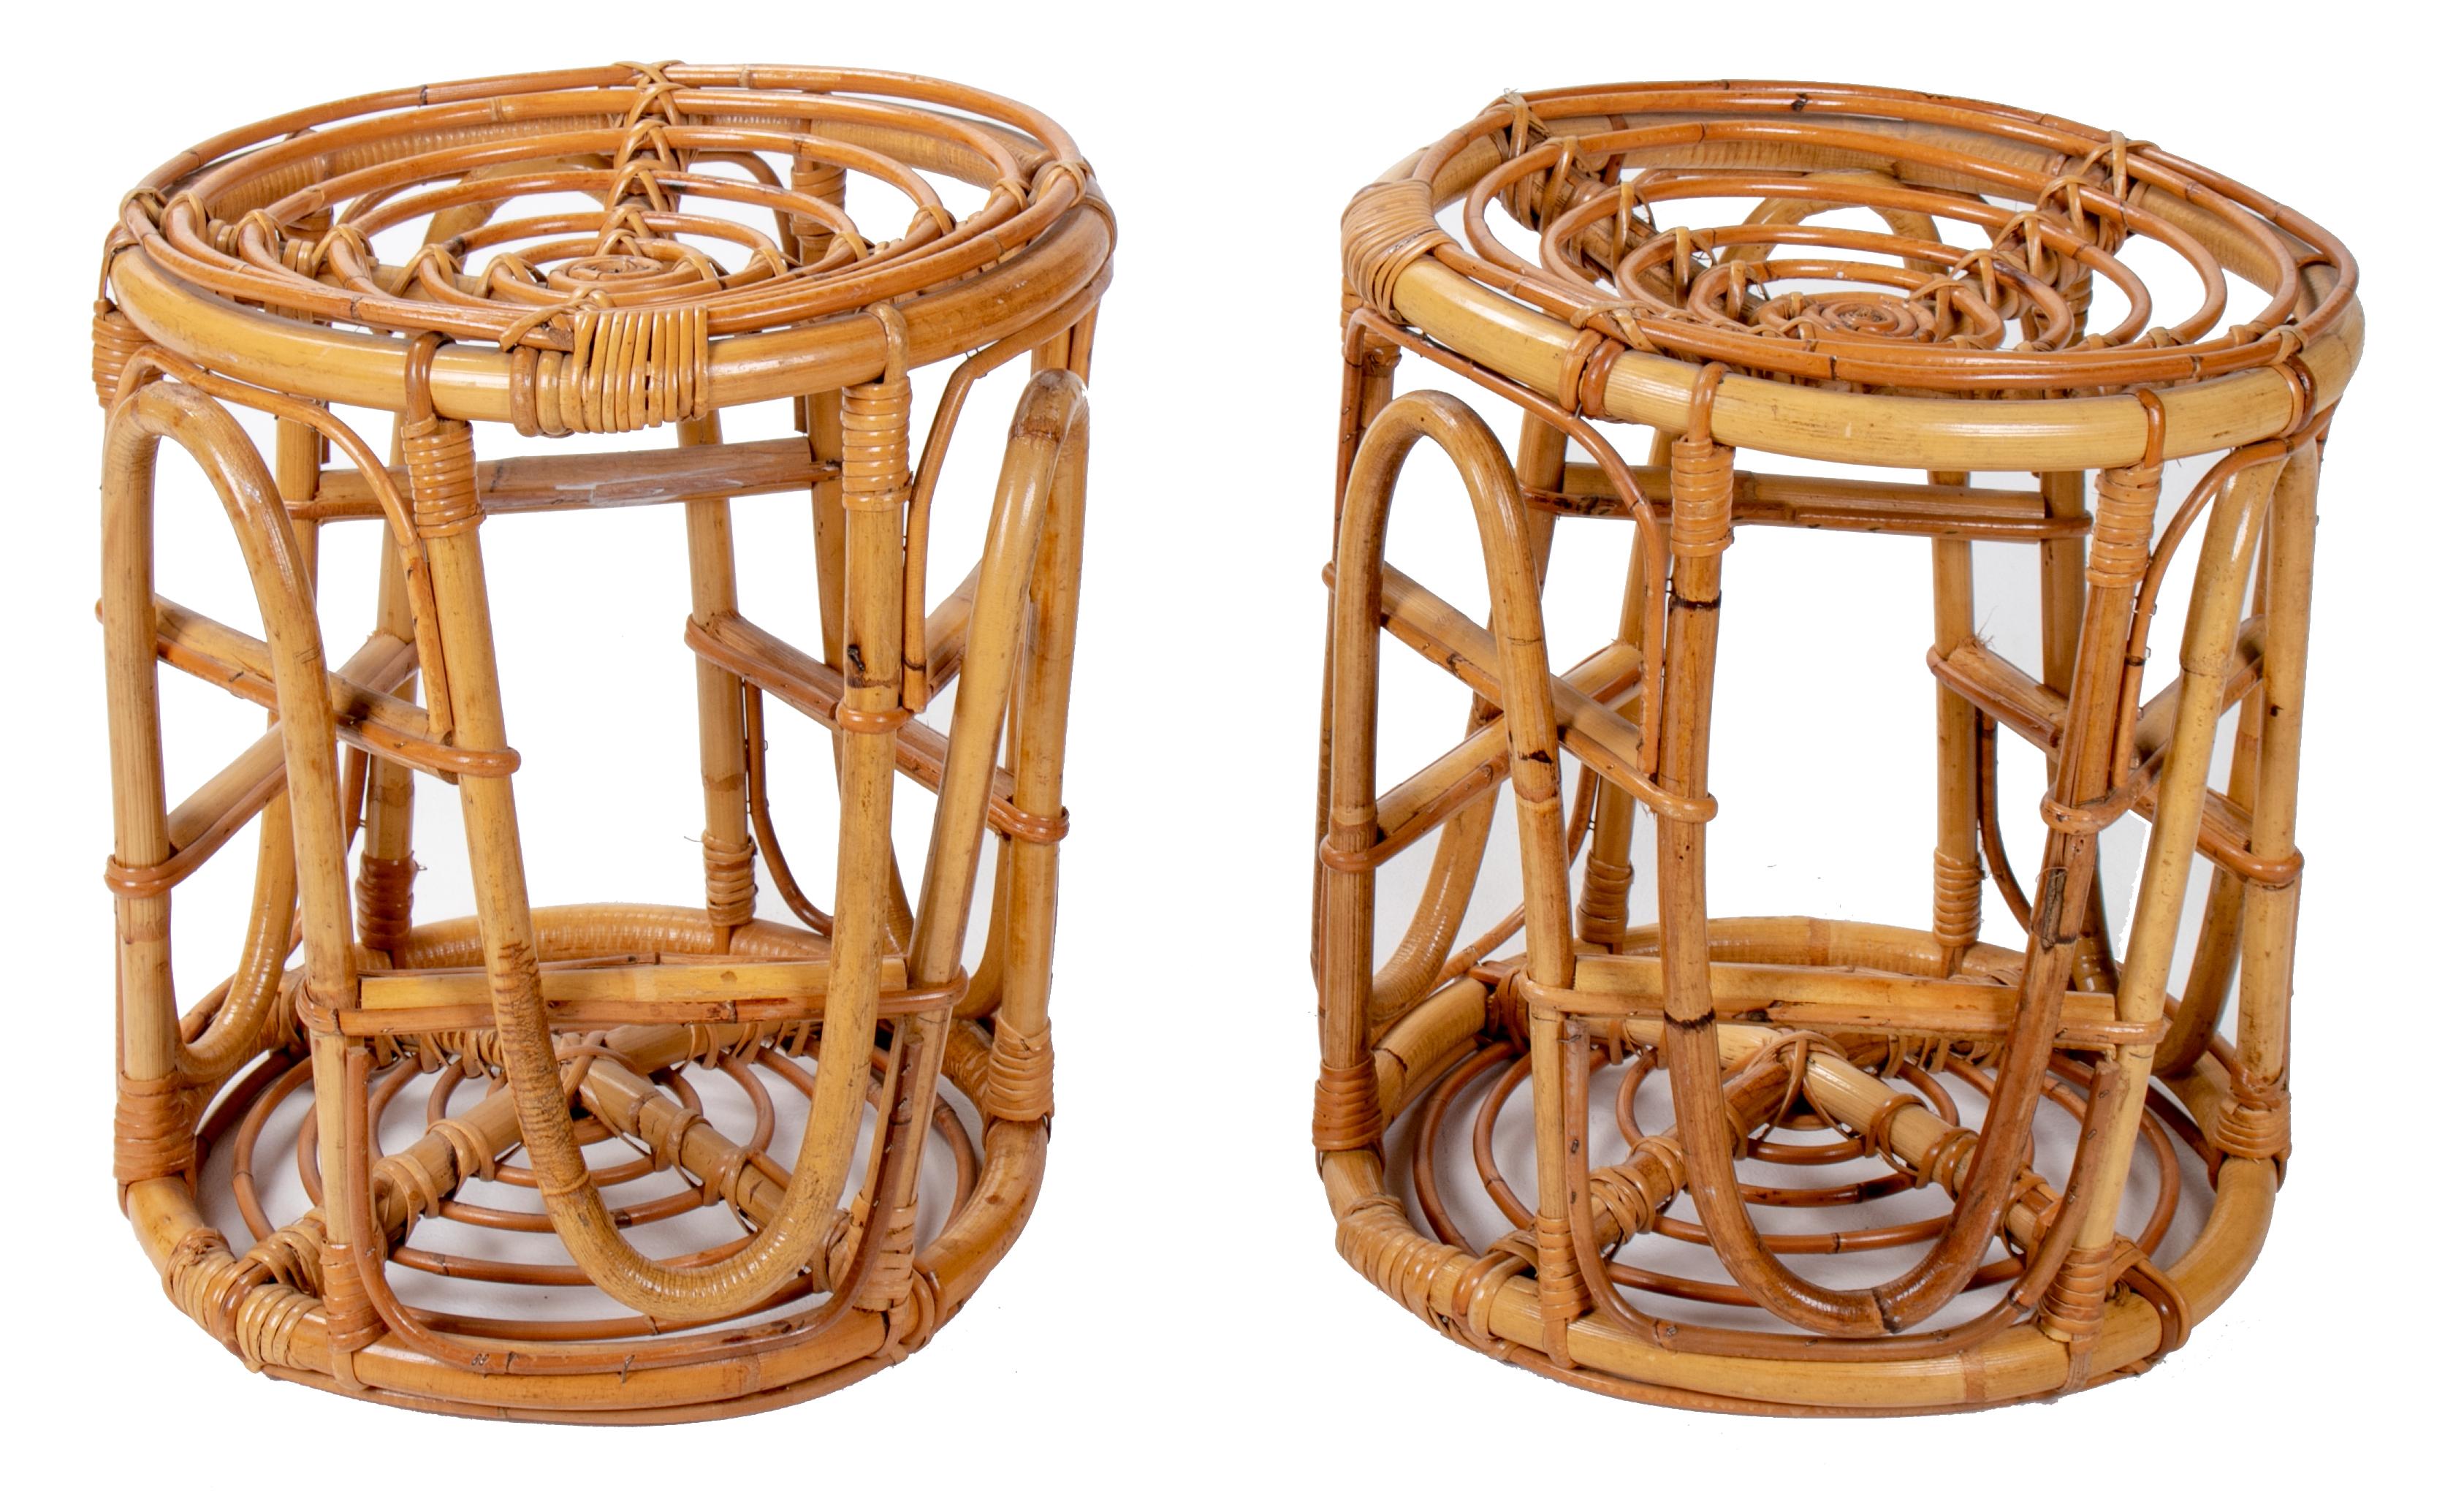 Pair of Spanish bamboo and wicker stools from the 1970s.